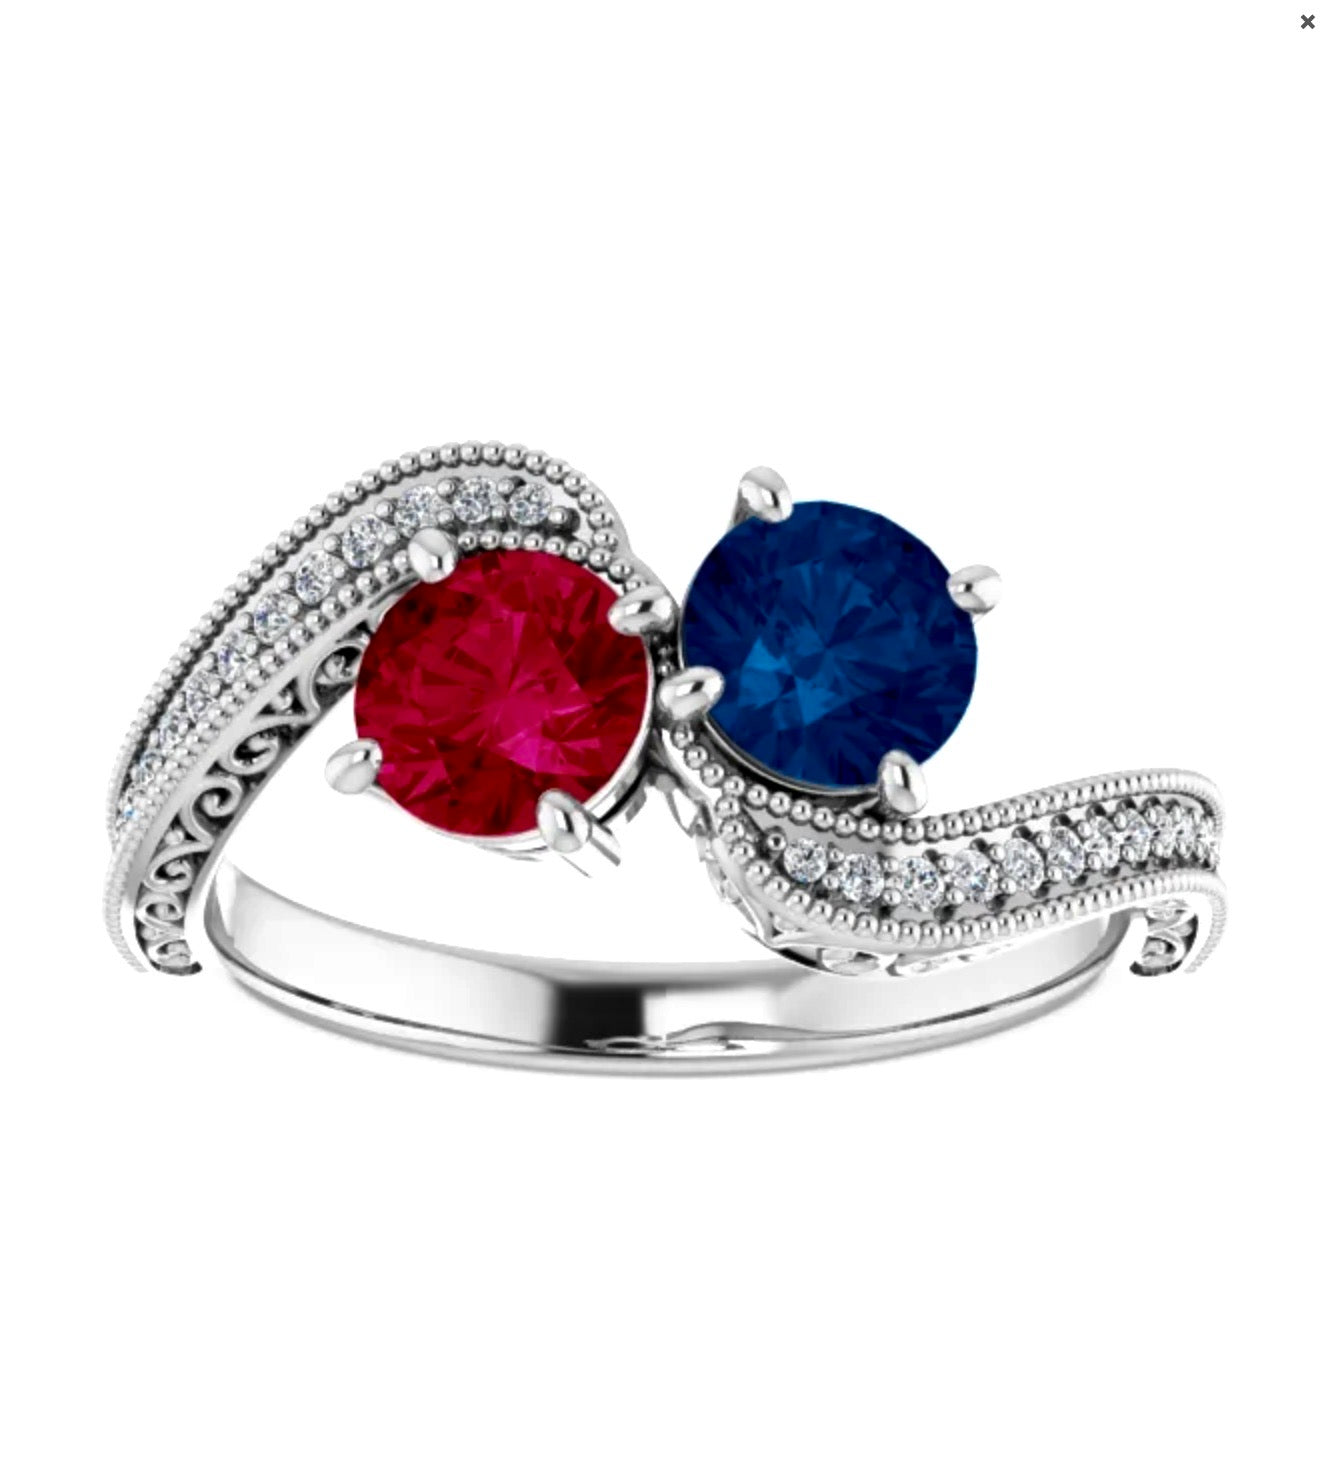 Ruby and Sapphire Bypass "Toi Et Moi" Ring Engagement